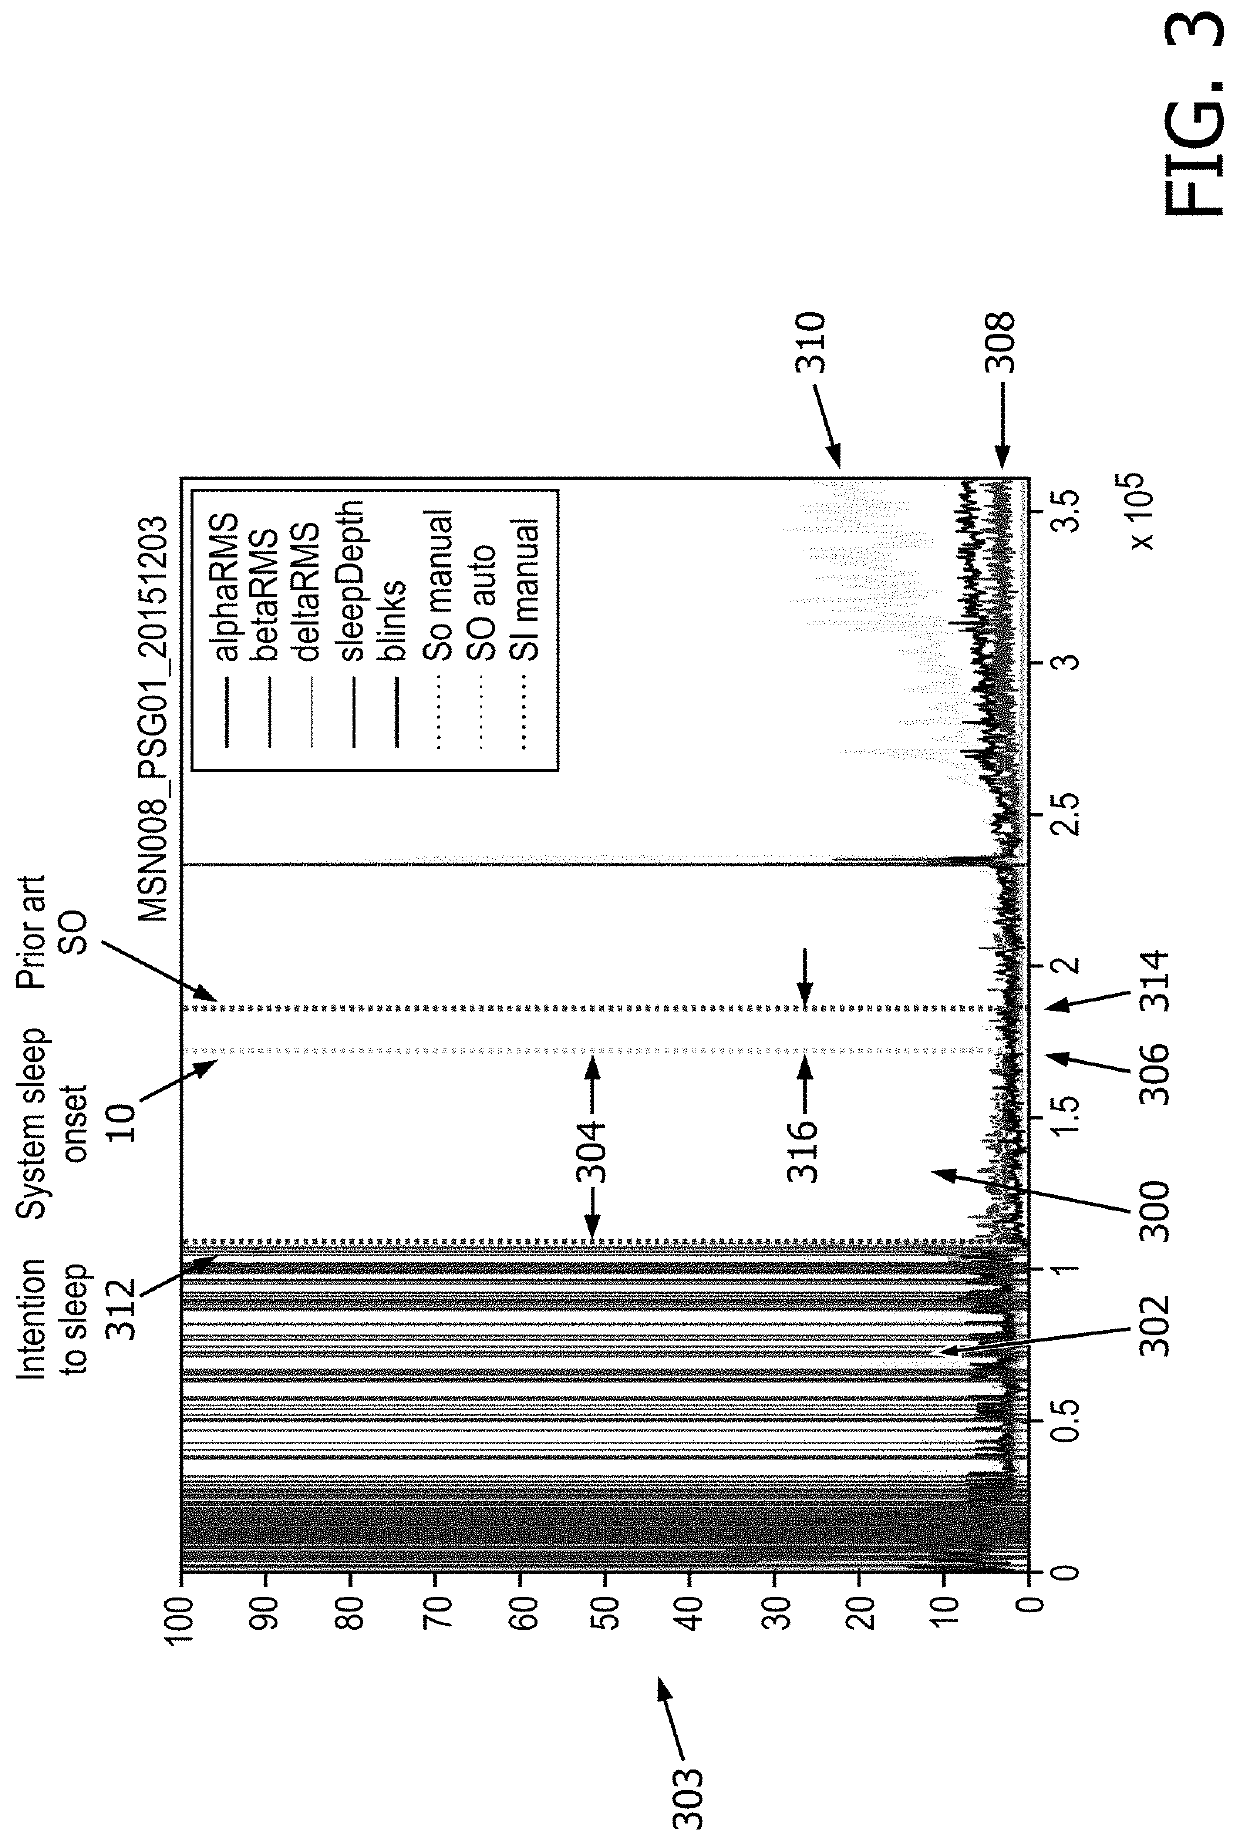 System and method for determining sleep onset latency